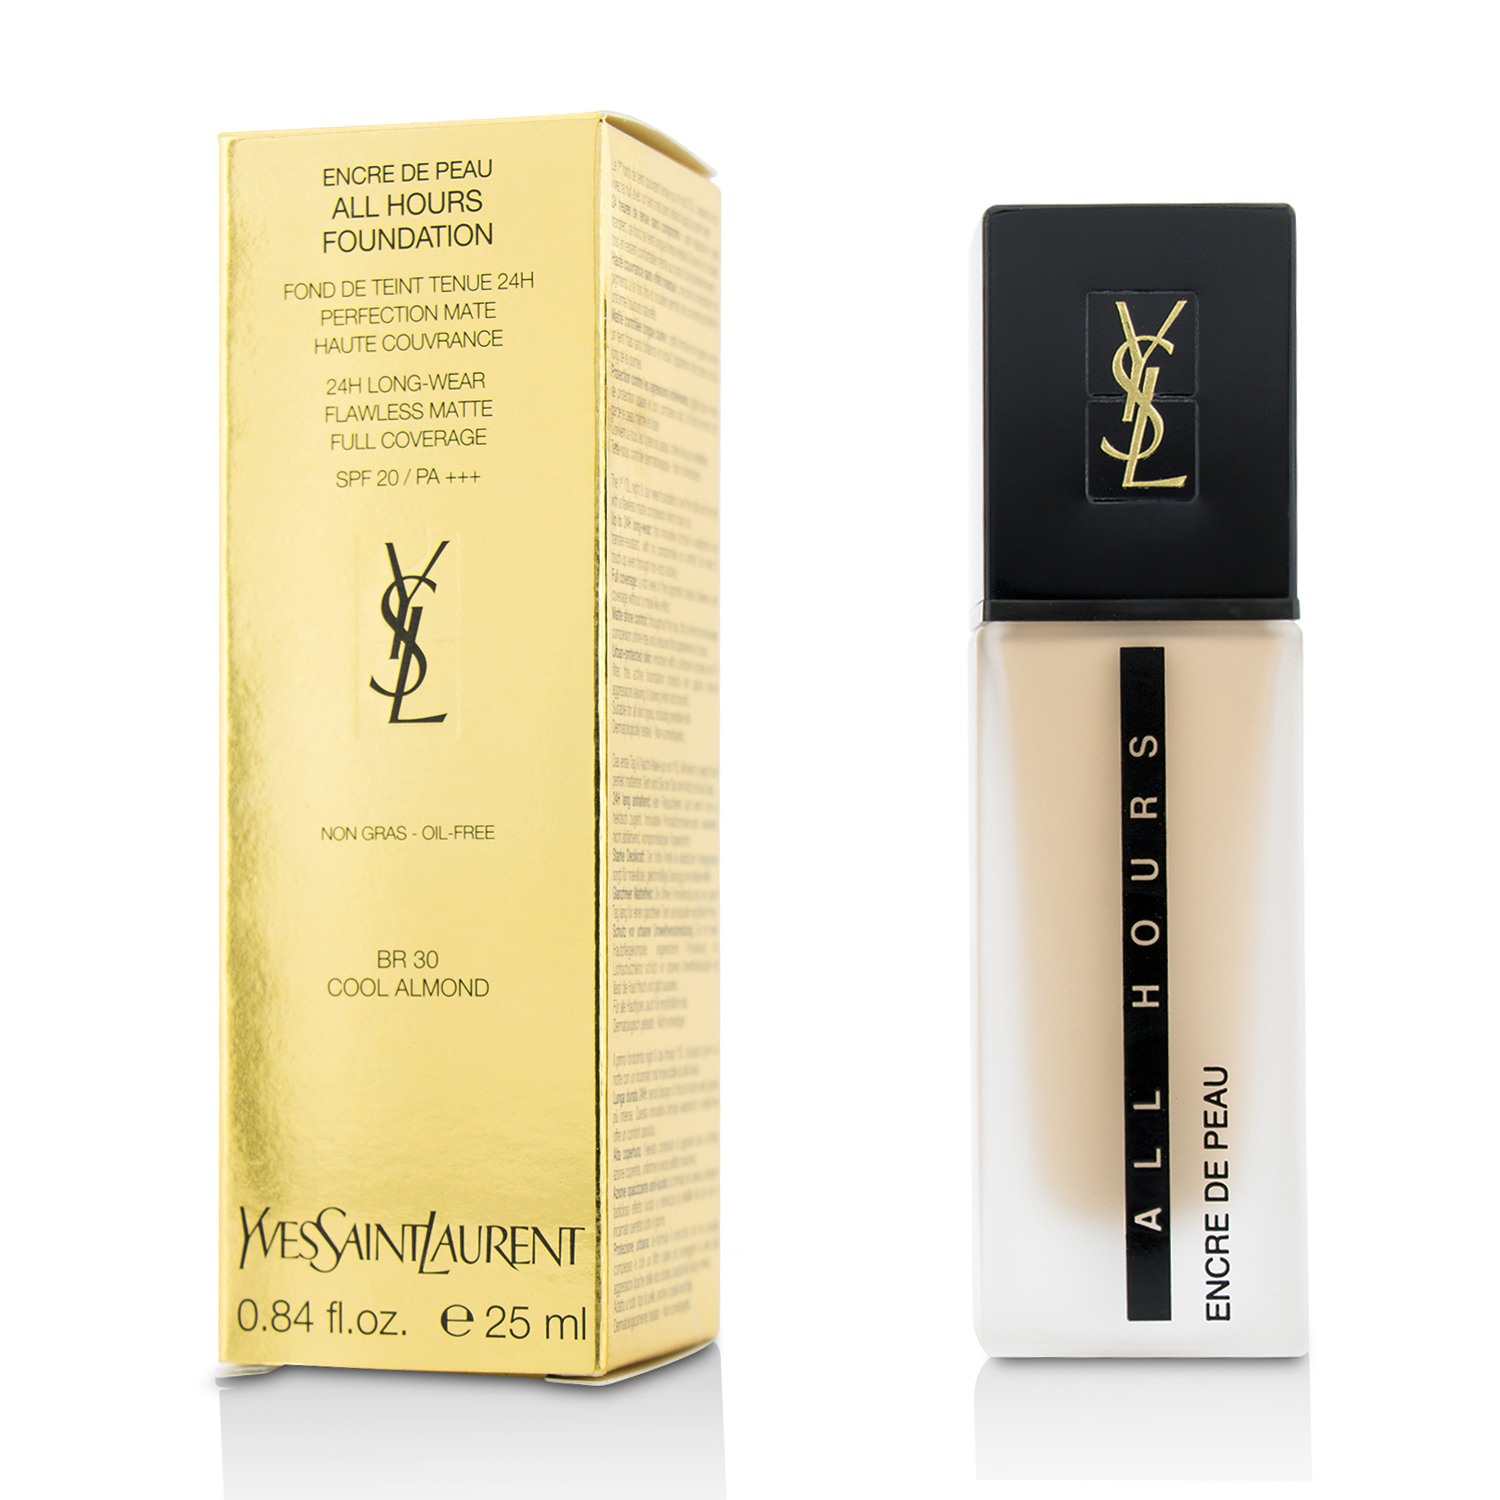 All Hours Foundation SPF 20 - # BR30 Cool Almond Yves Saint Laurent Image